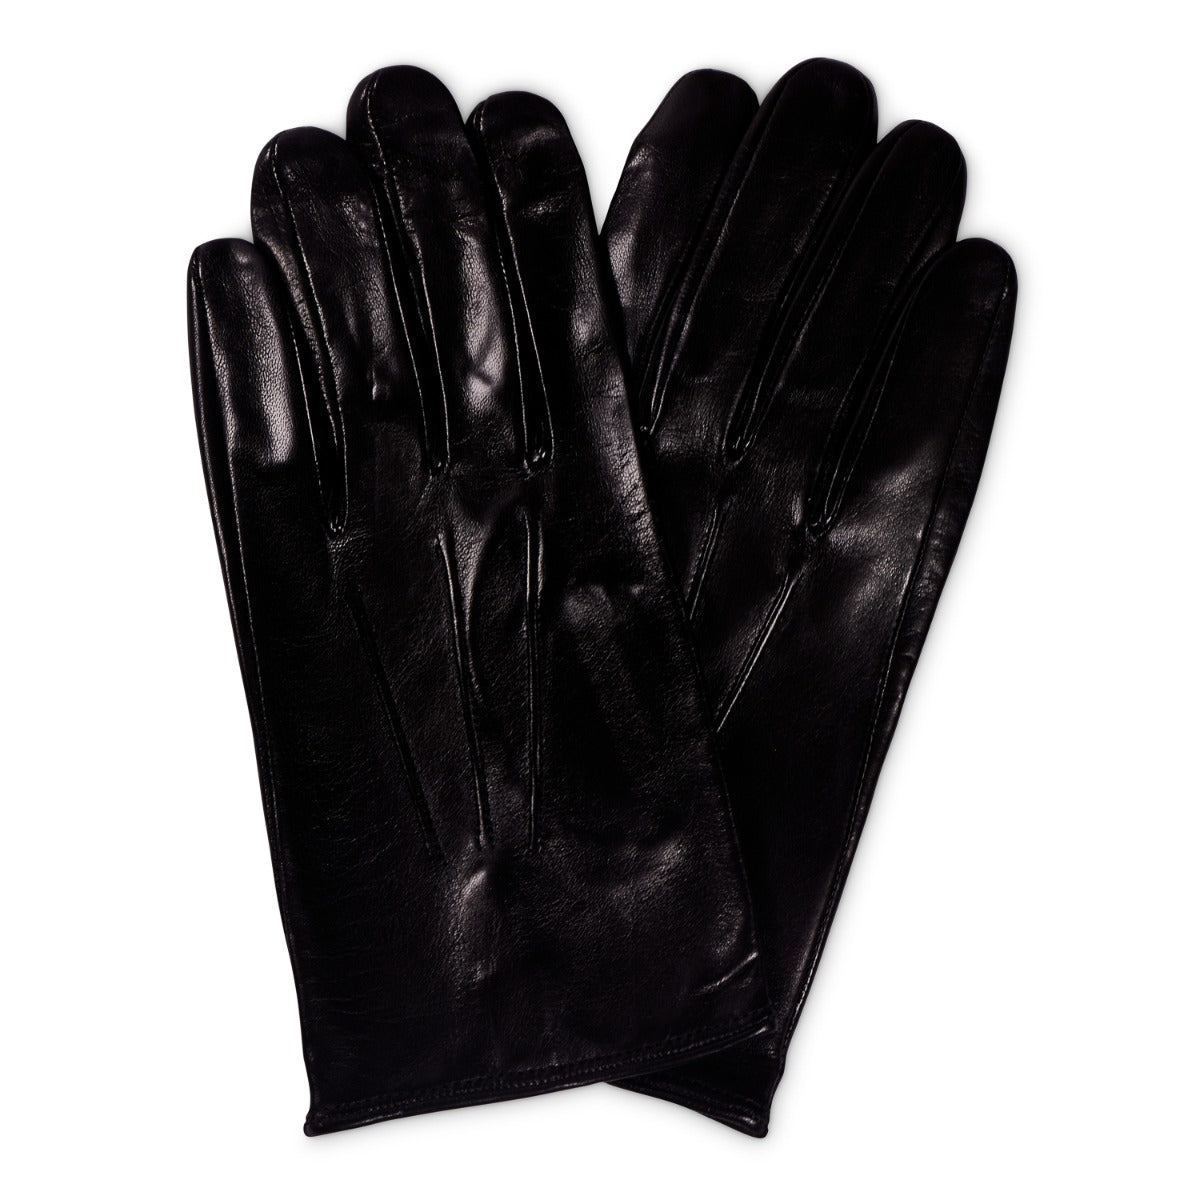 A pair of Sovereign Grade Black Nappa Leather Gloves, Silk Lined by KirbyAllison.com on a white background featuring a silk-lined interior.